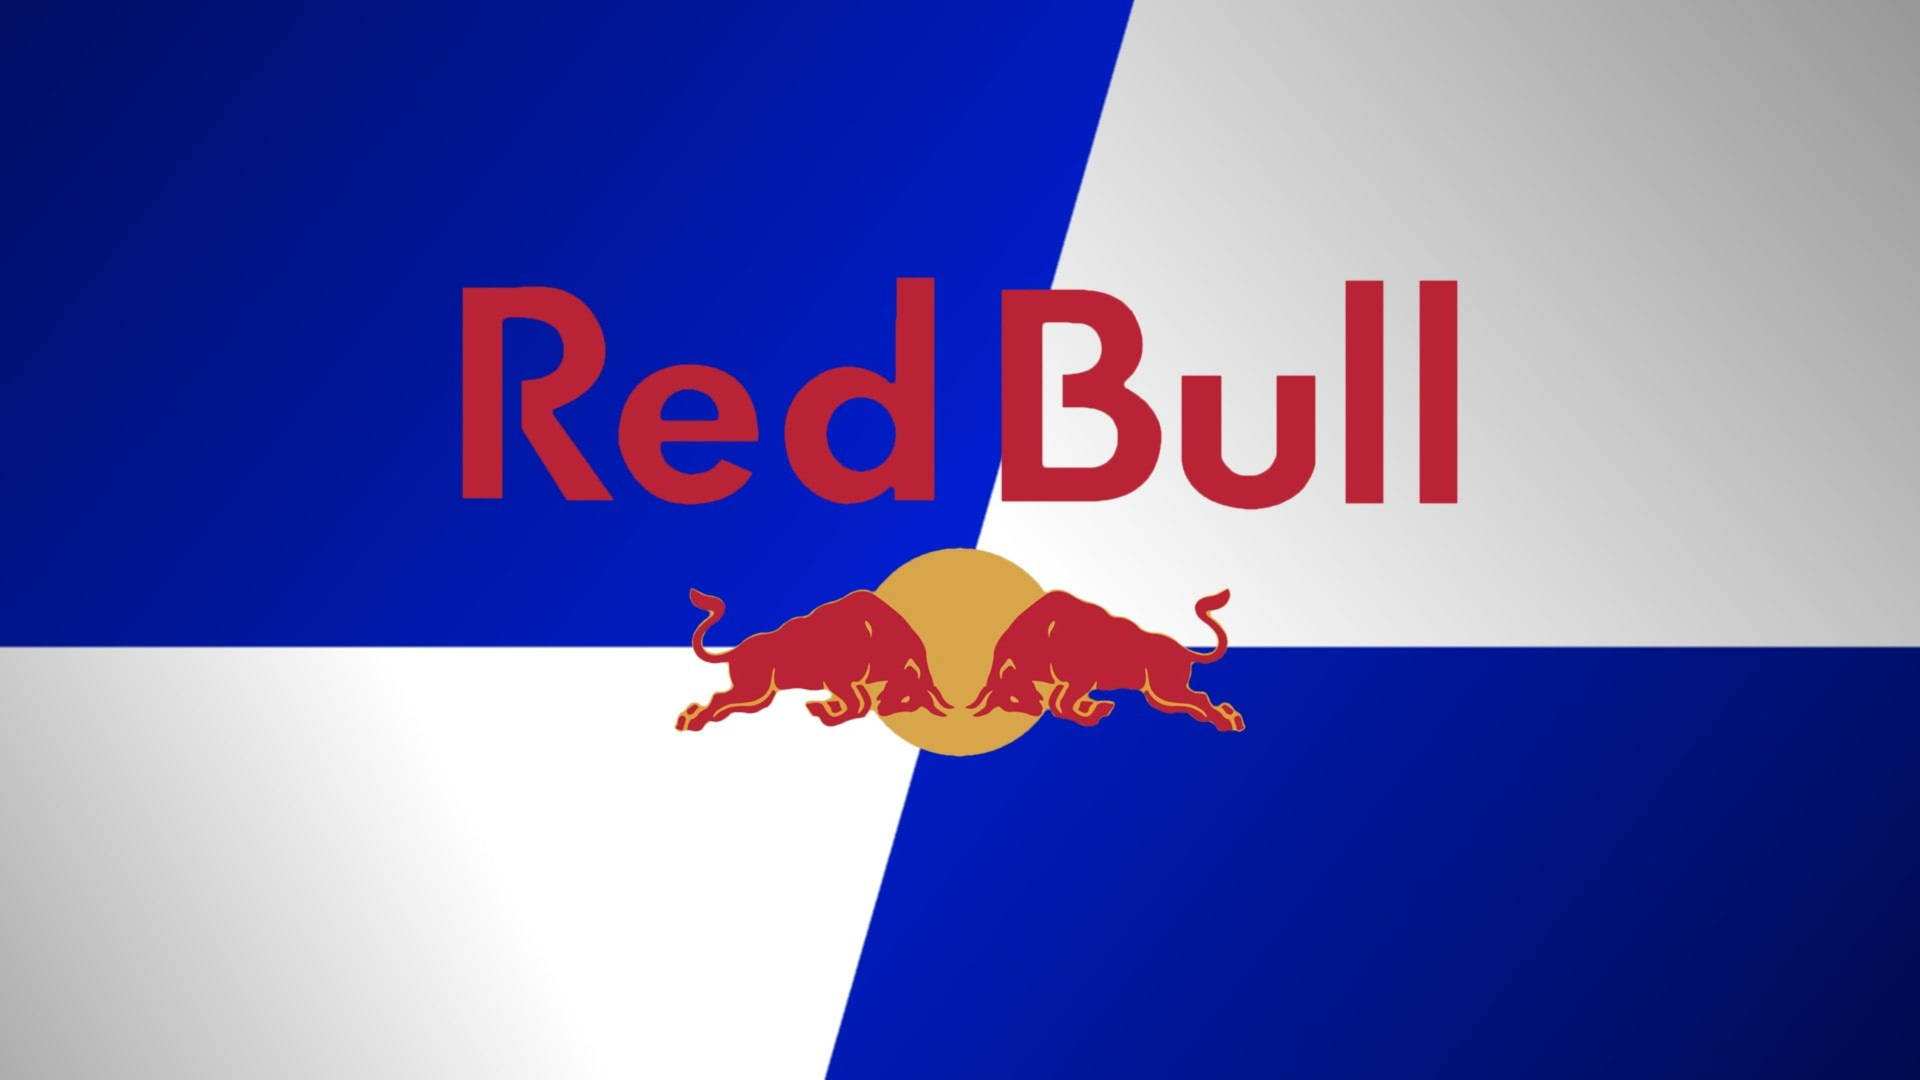 Red Bull Background Photos